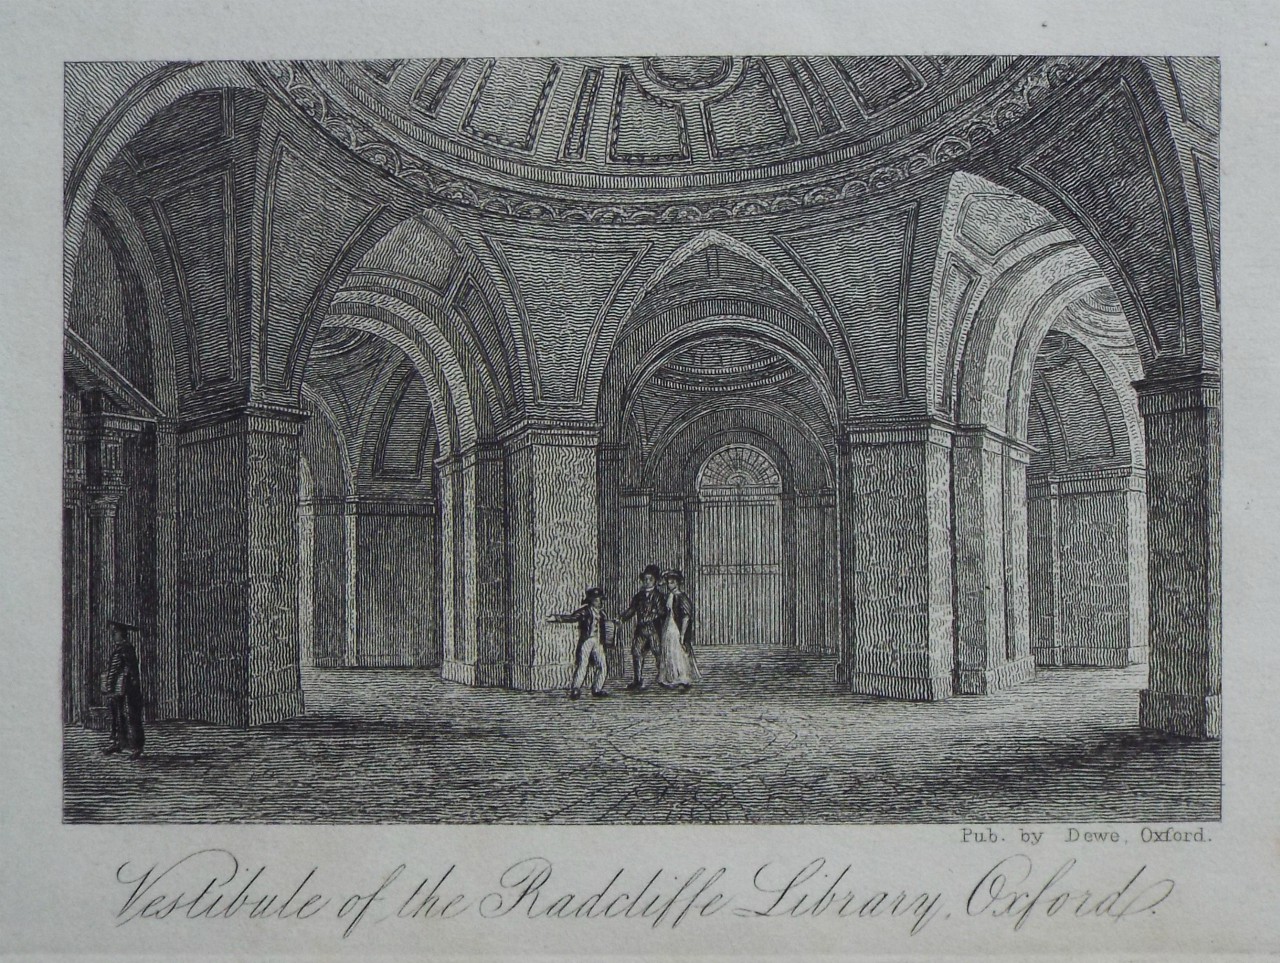 Print - Vestibule of the Radcliffe Library, Oxford.